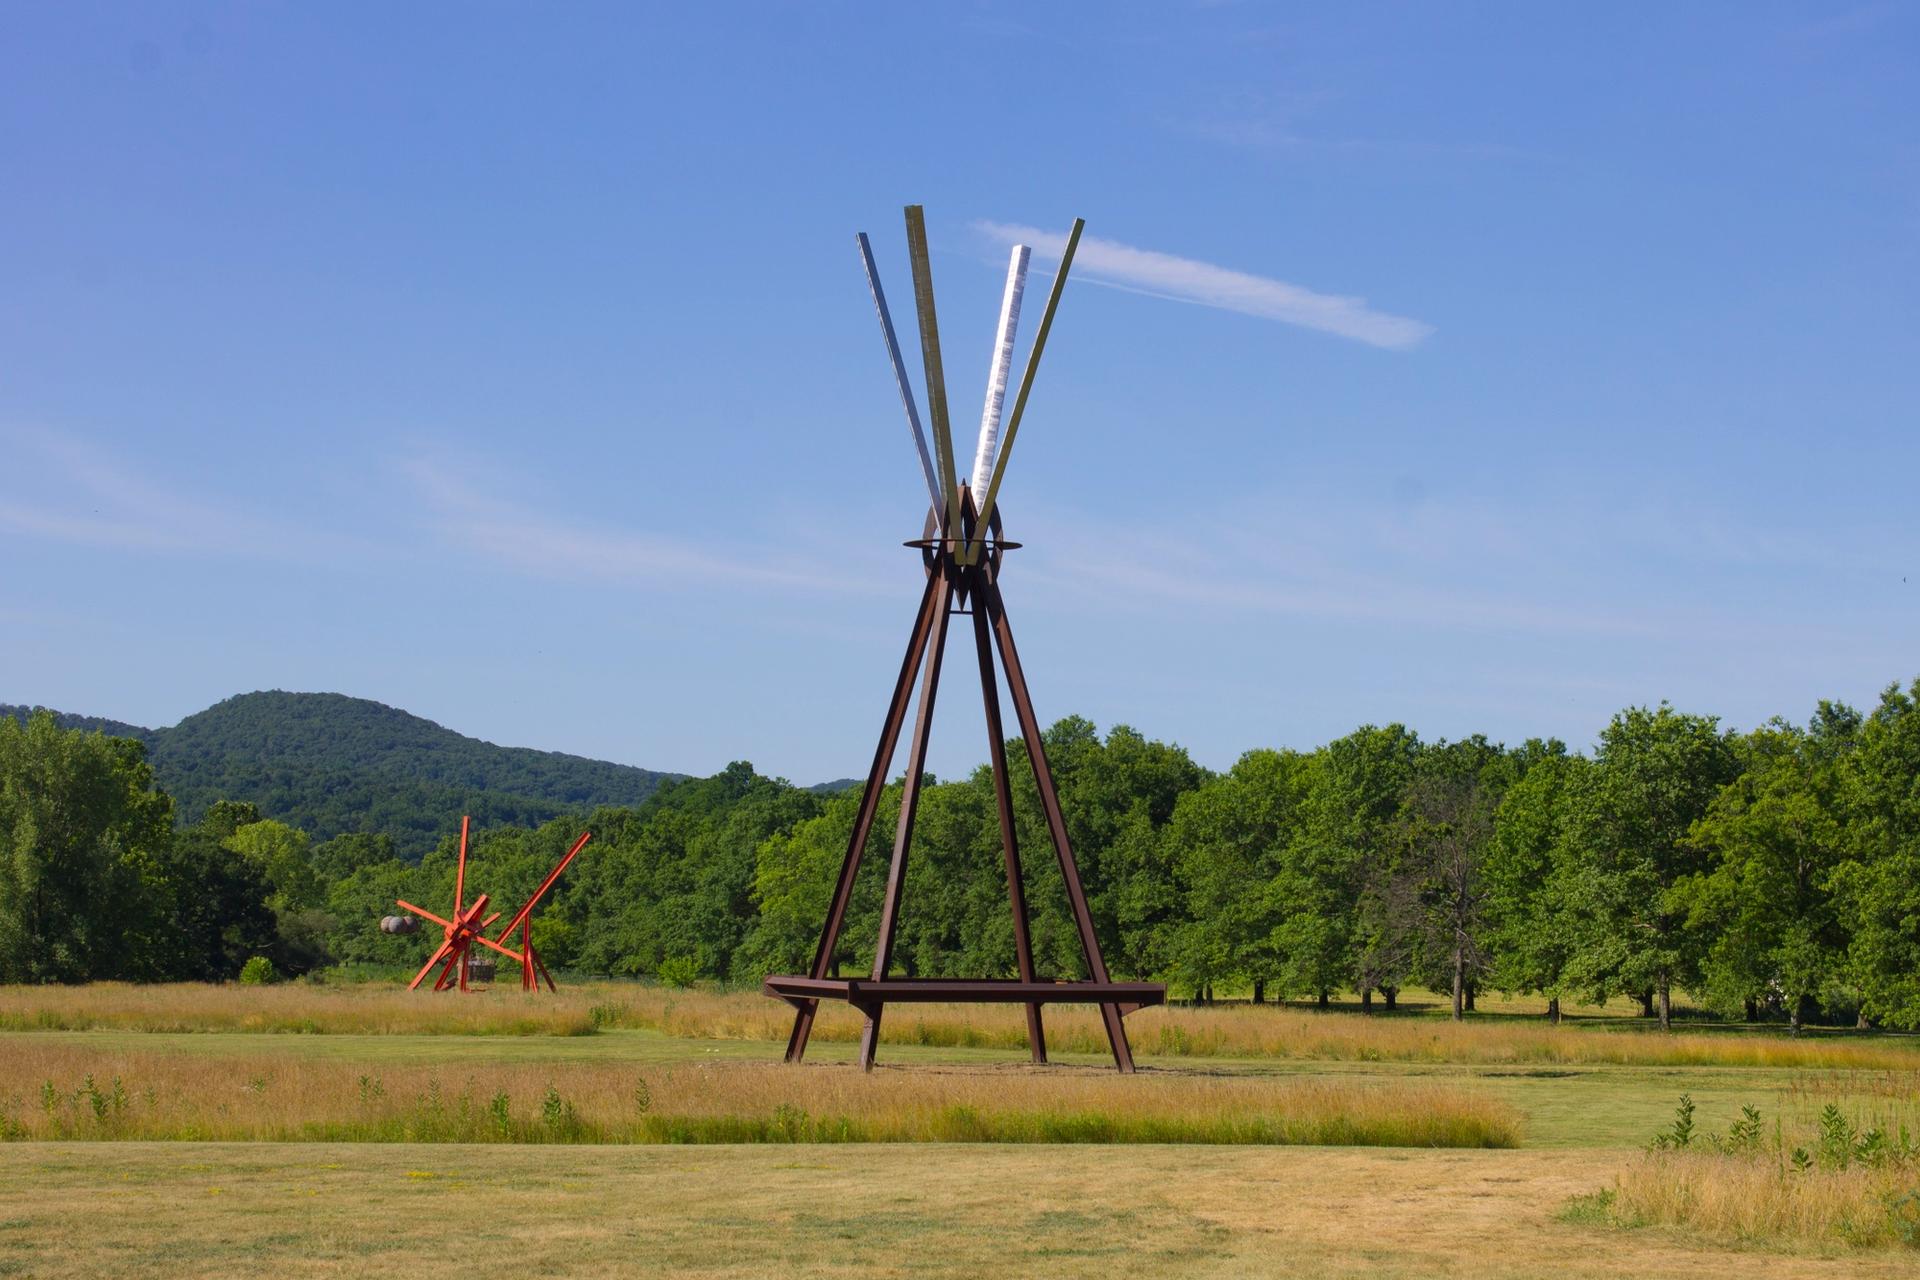 Visitors to Storm King and other sculpture parks this summer will face stricter guidelines on how they can experience the park Photo by Jerry L. Thompson, courtesy of Storm King Art Center